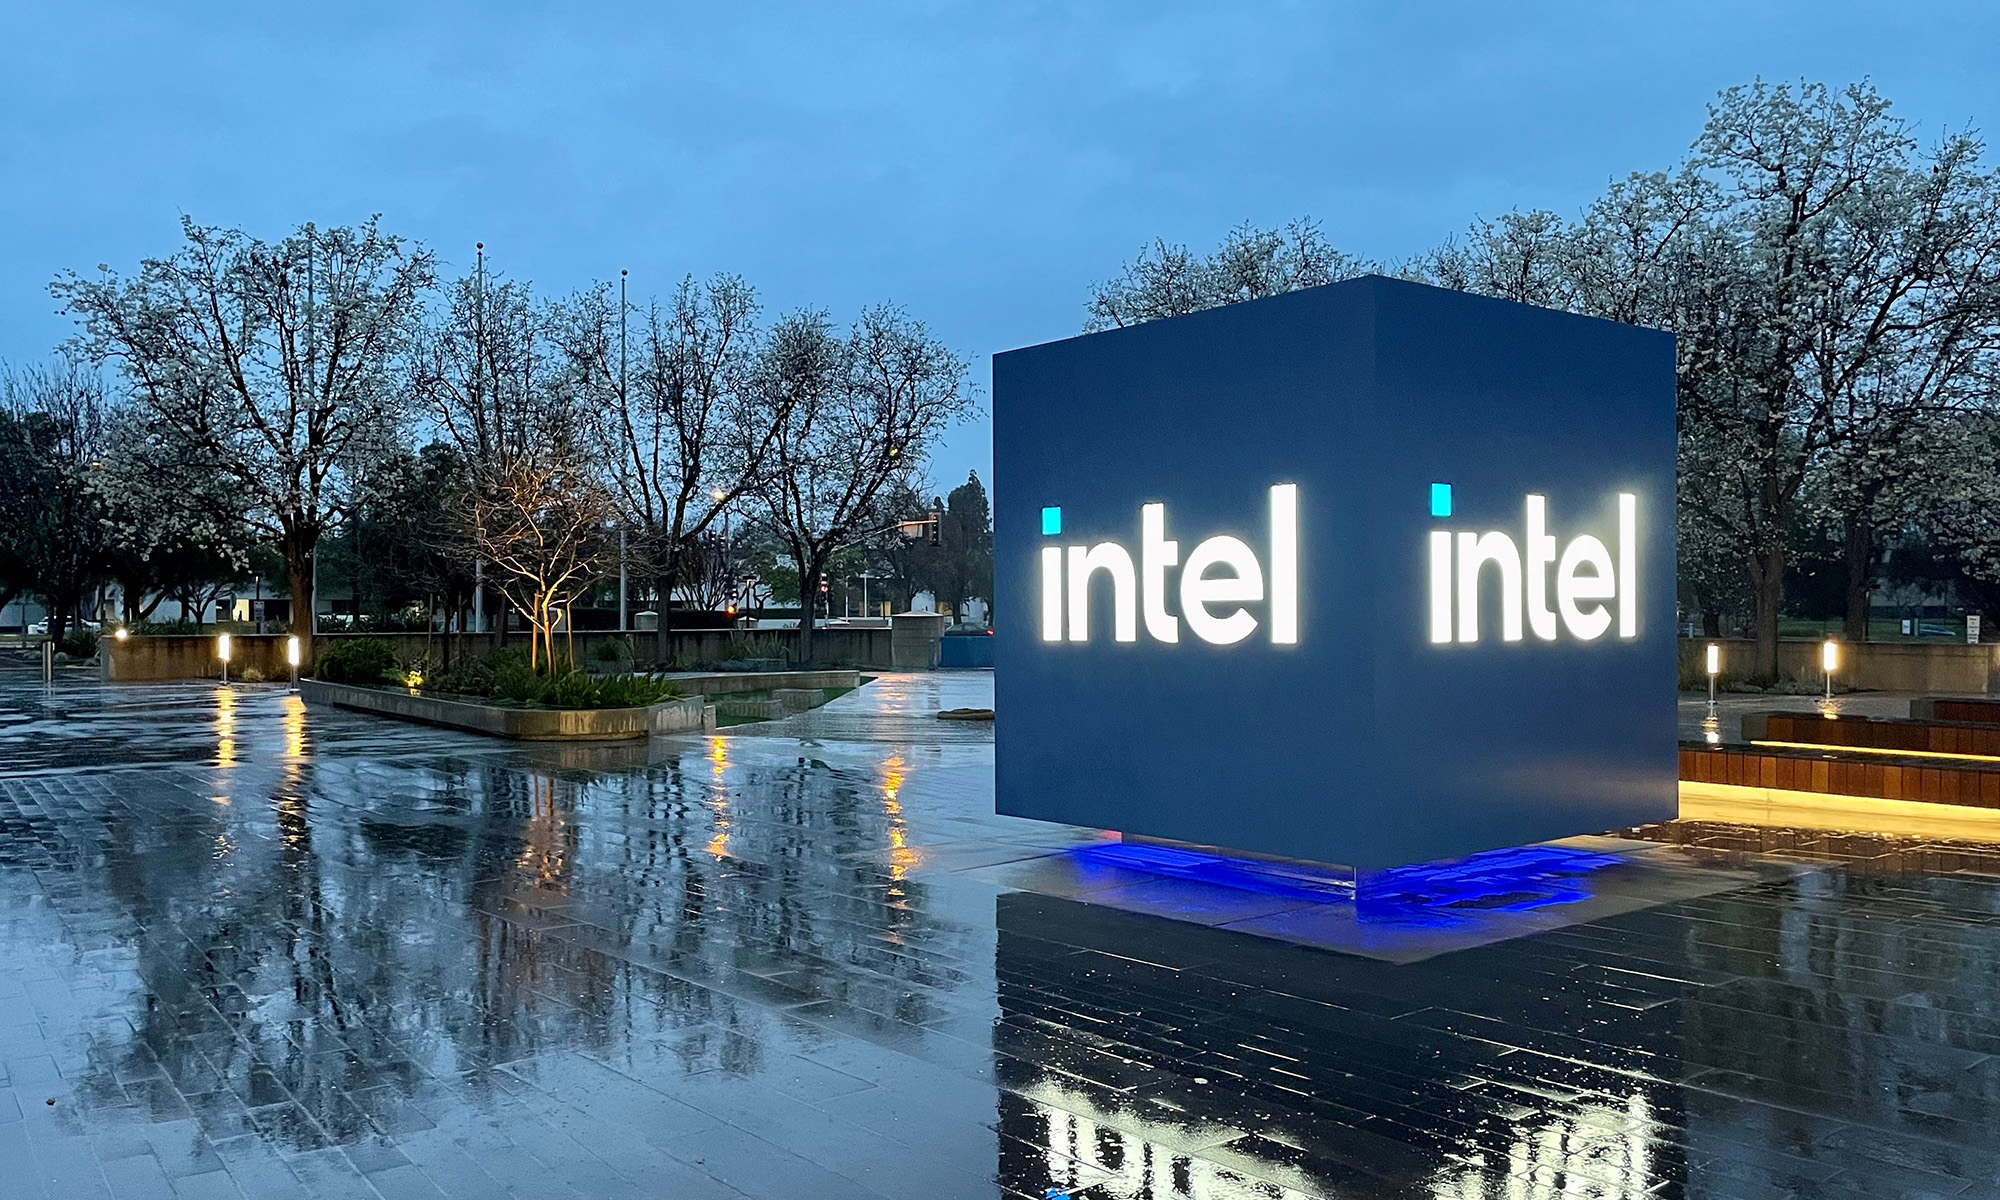 what's going on with intel stock?